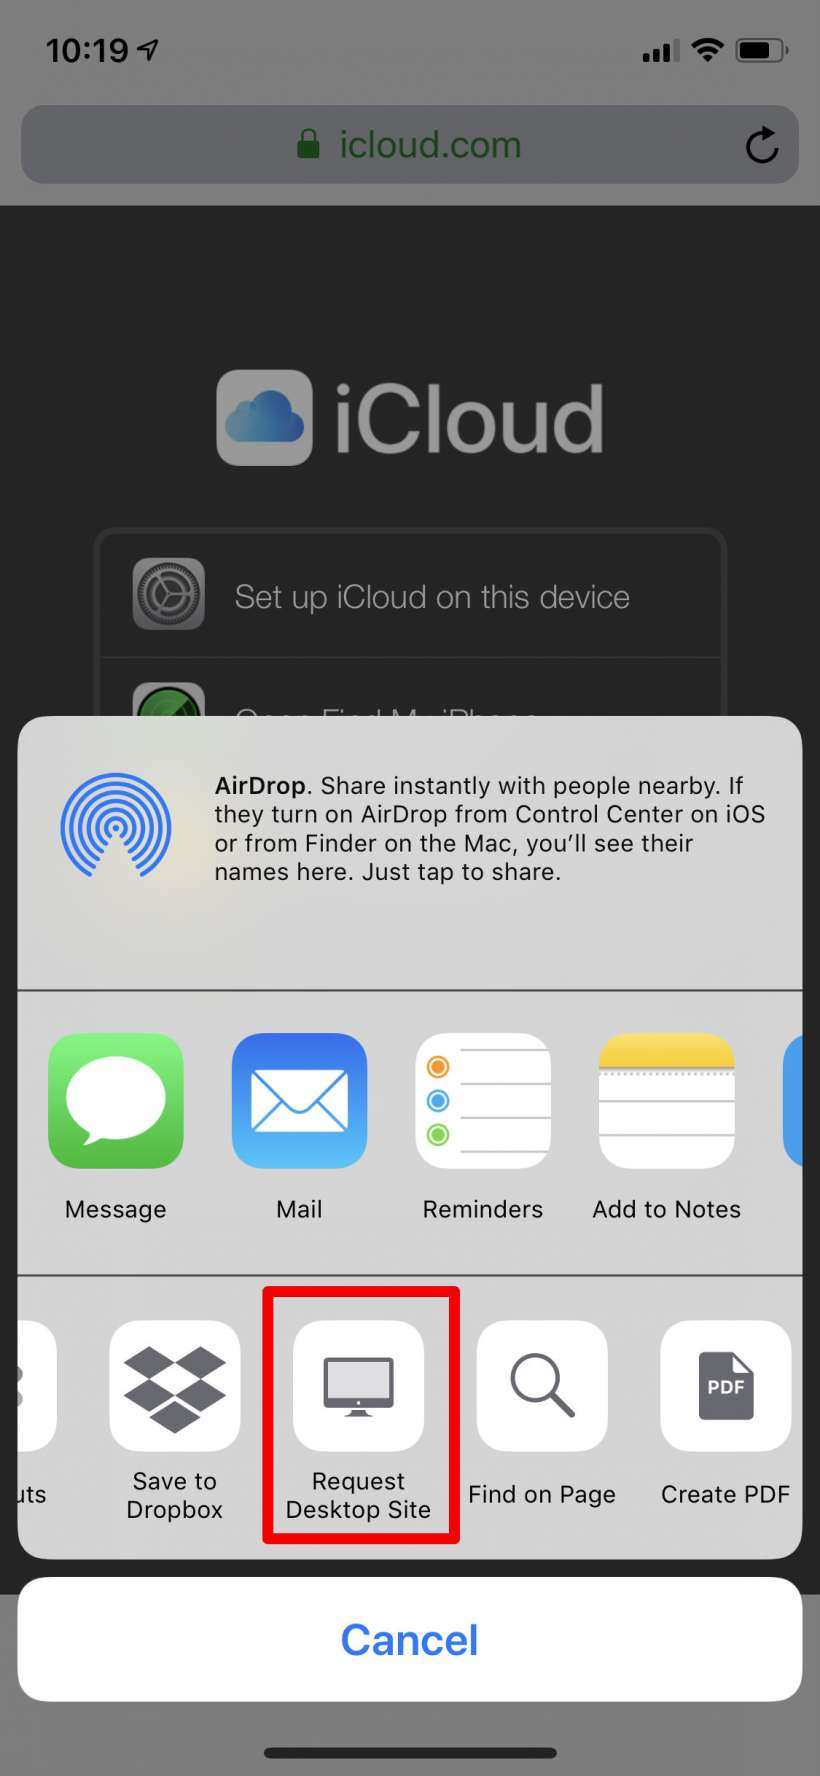 How to log into iCloud from your iPhone or iPad.